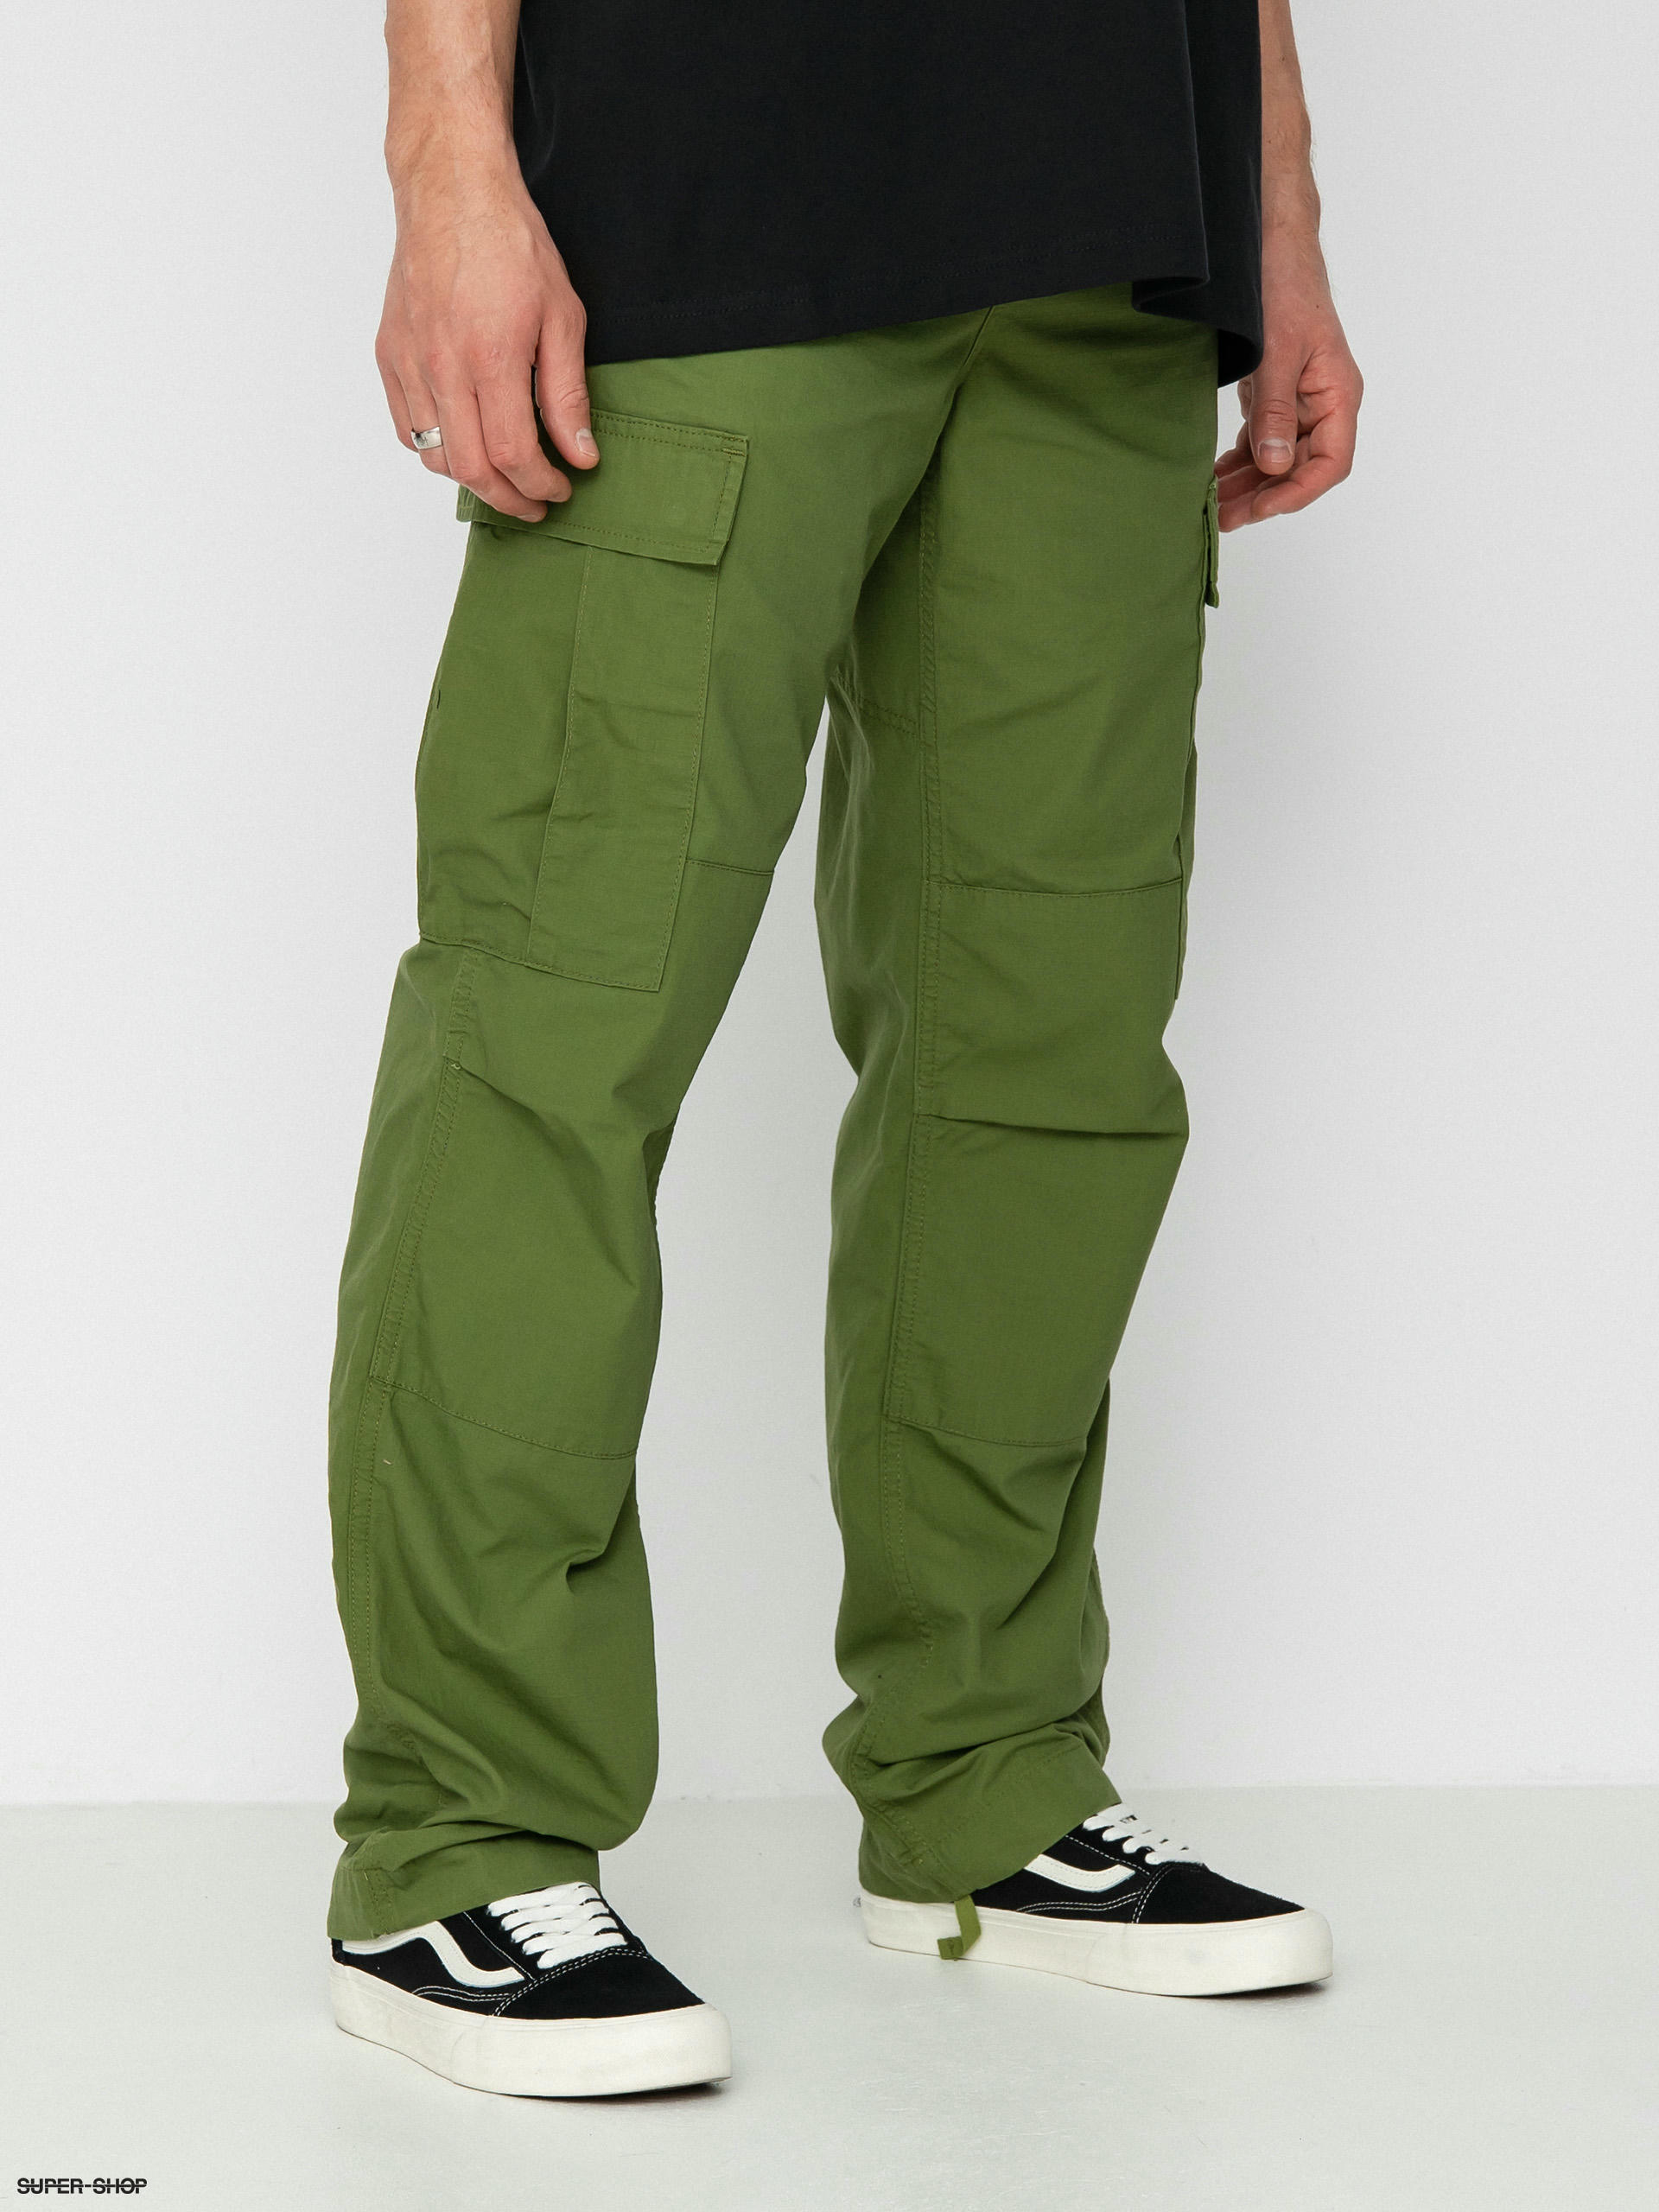 Rugged Flex Relaxed Fit Ripstop Cargo Work Pant  Most Popular  Carhartt